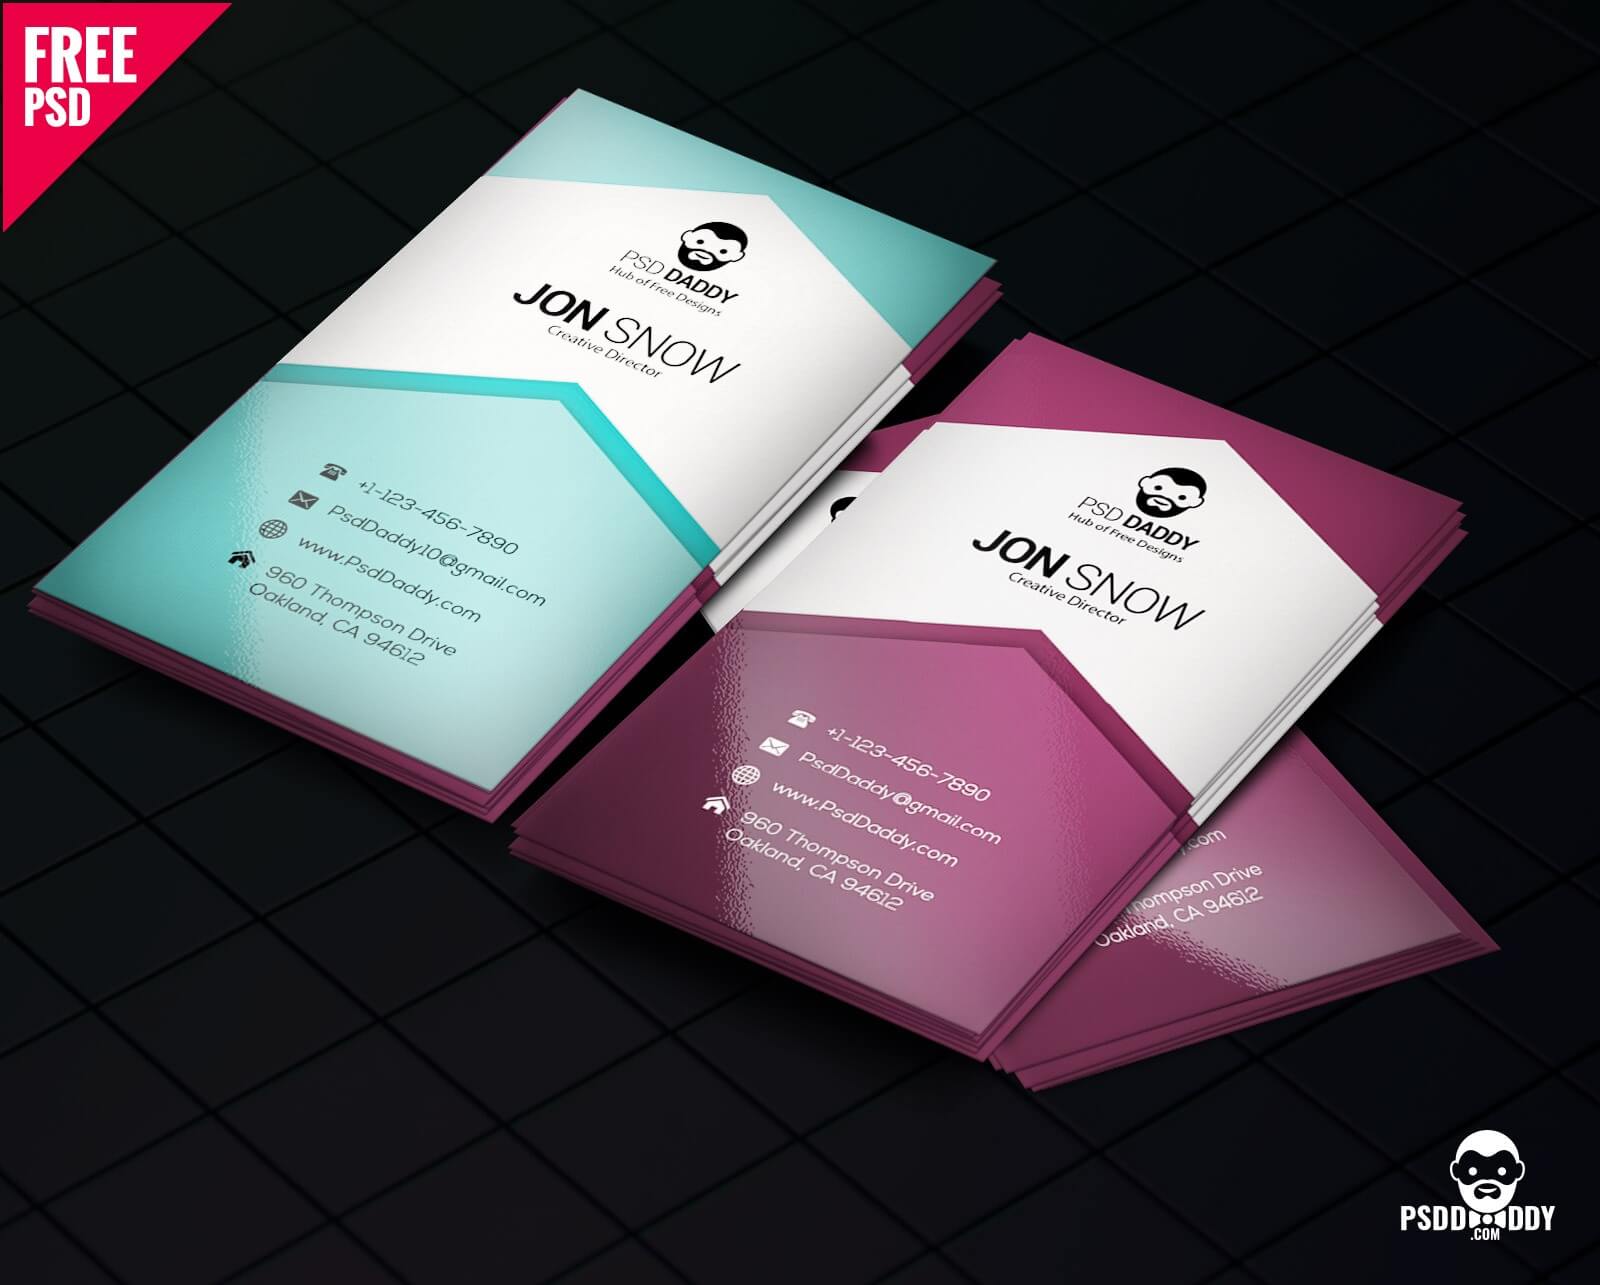 Download]Creative Business Card Psd Free | Psddaddy With Regard To Business Card Size Psd Template